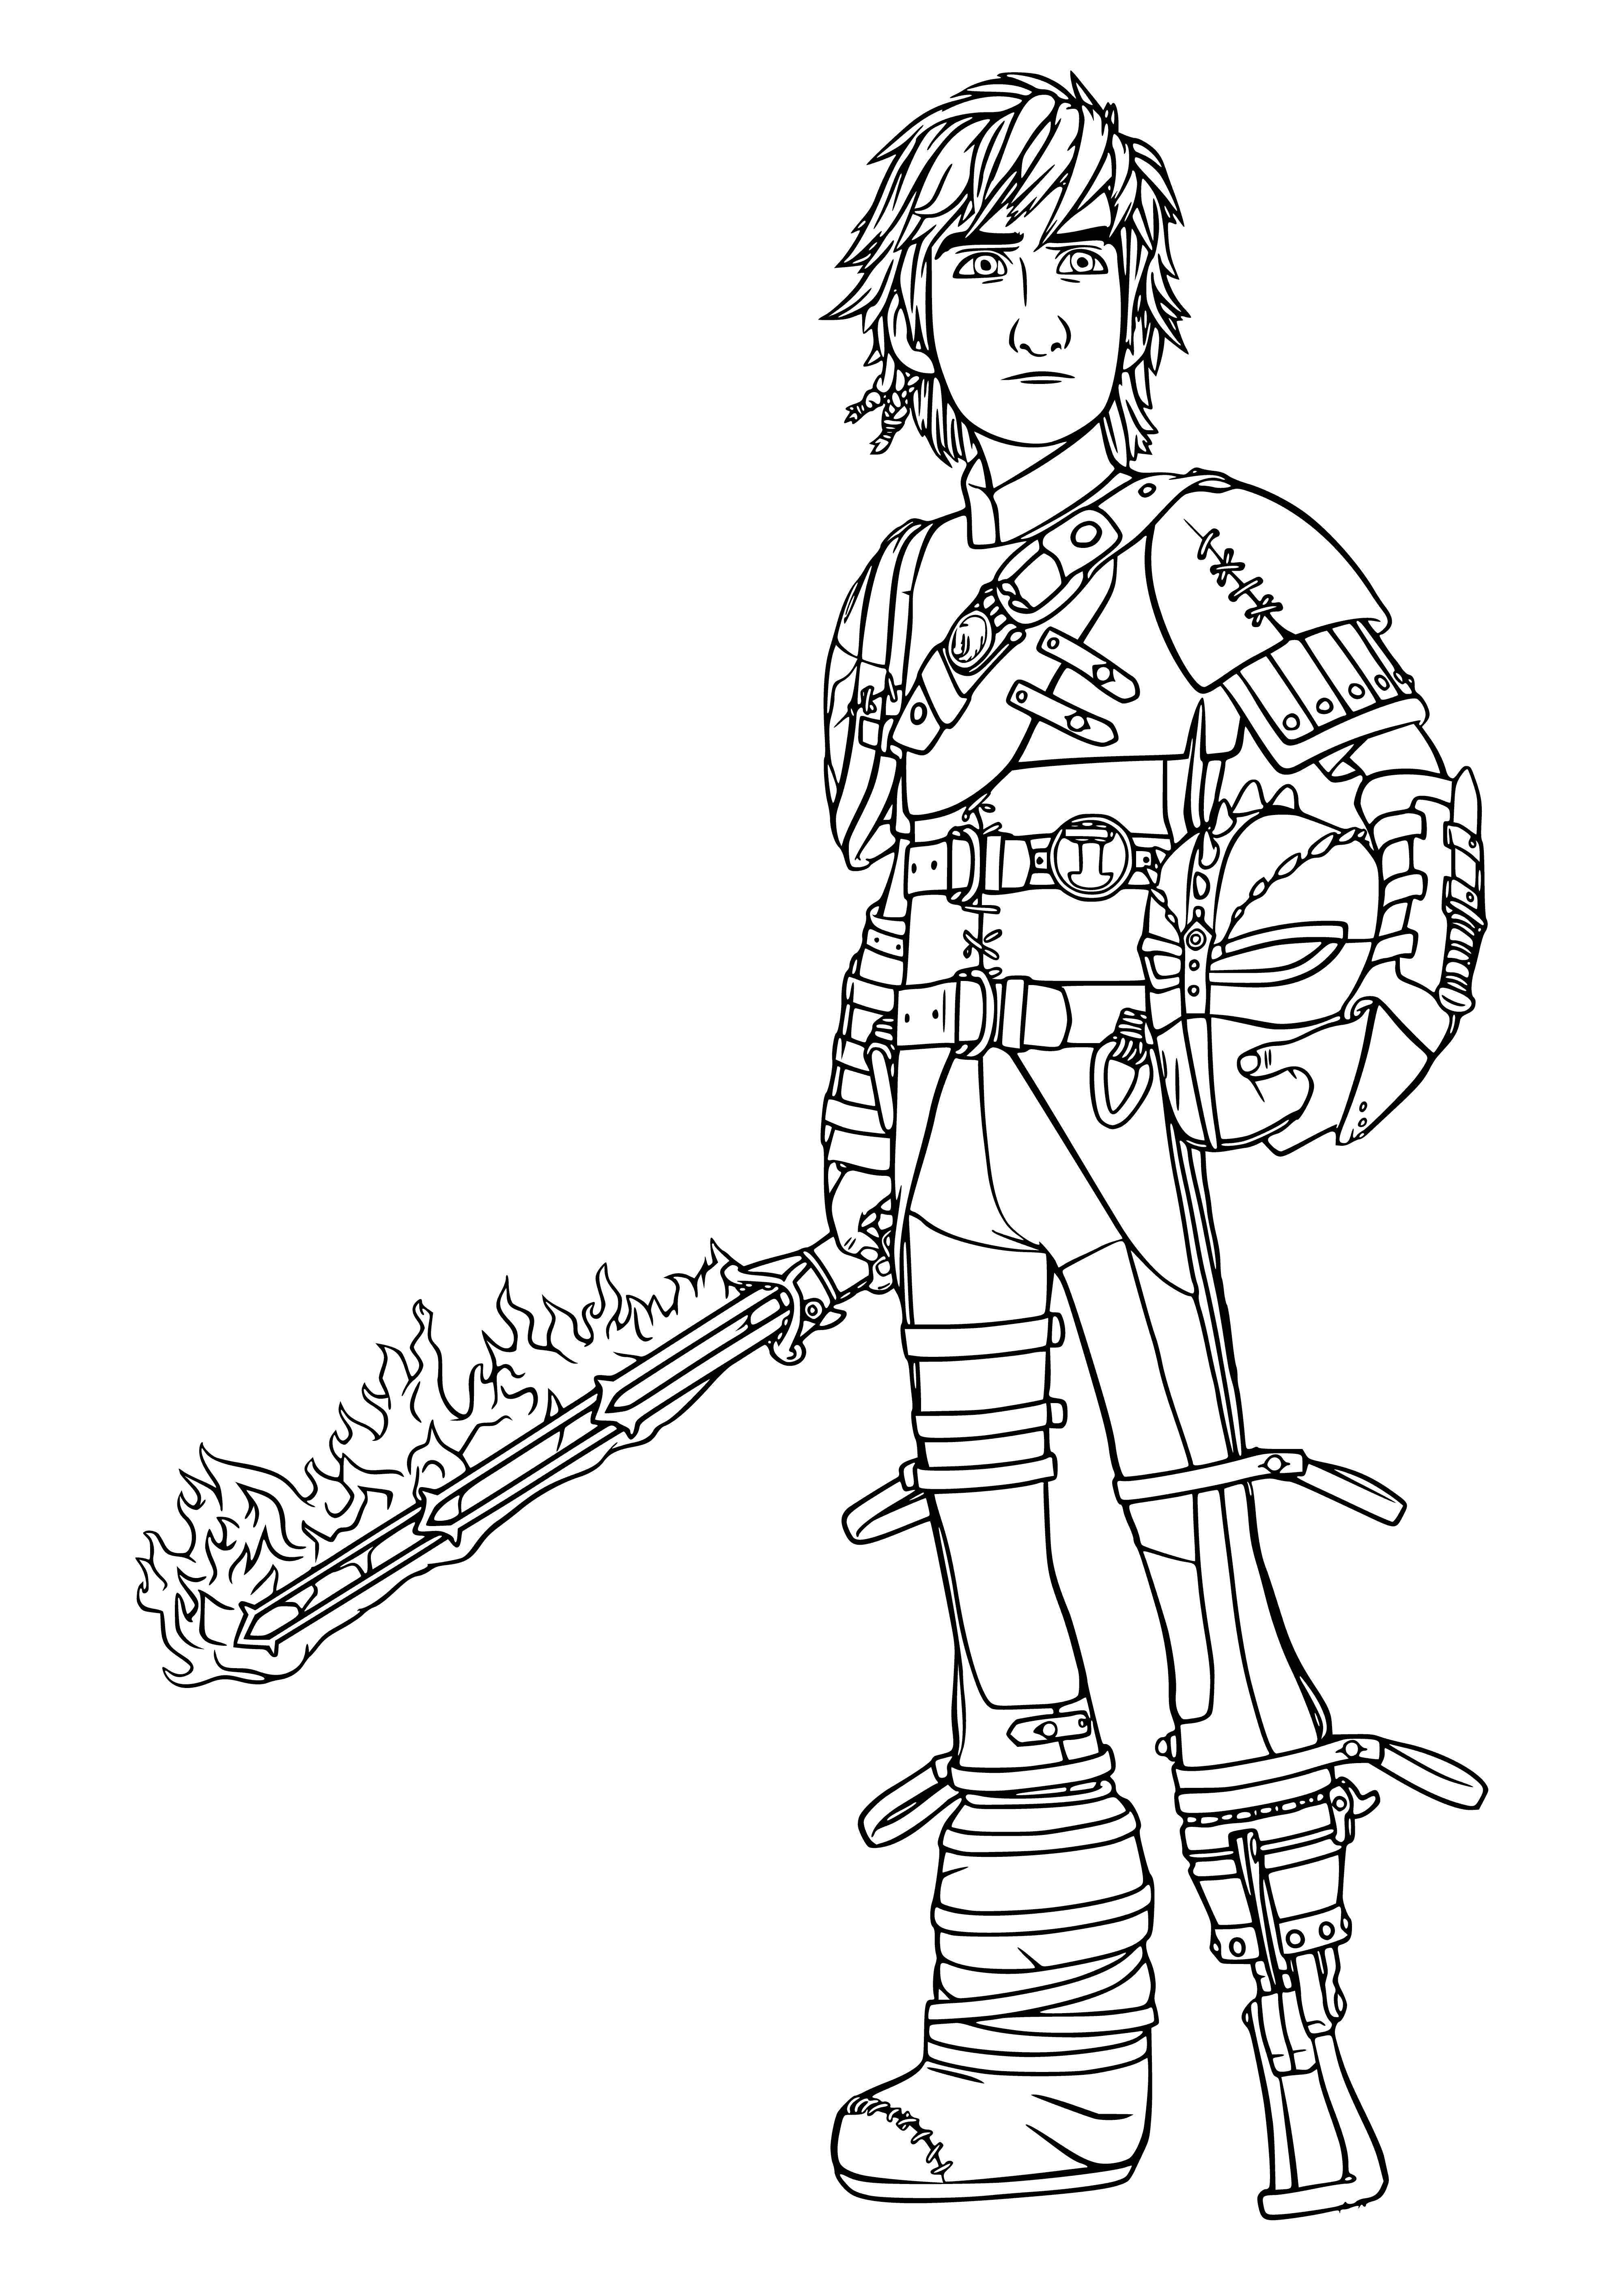 coloring page: Hiccup stands before a green dragon, staff in hand.